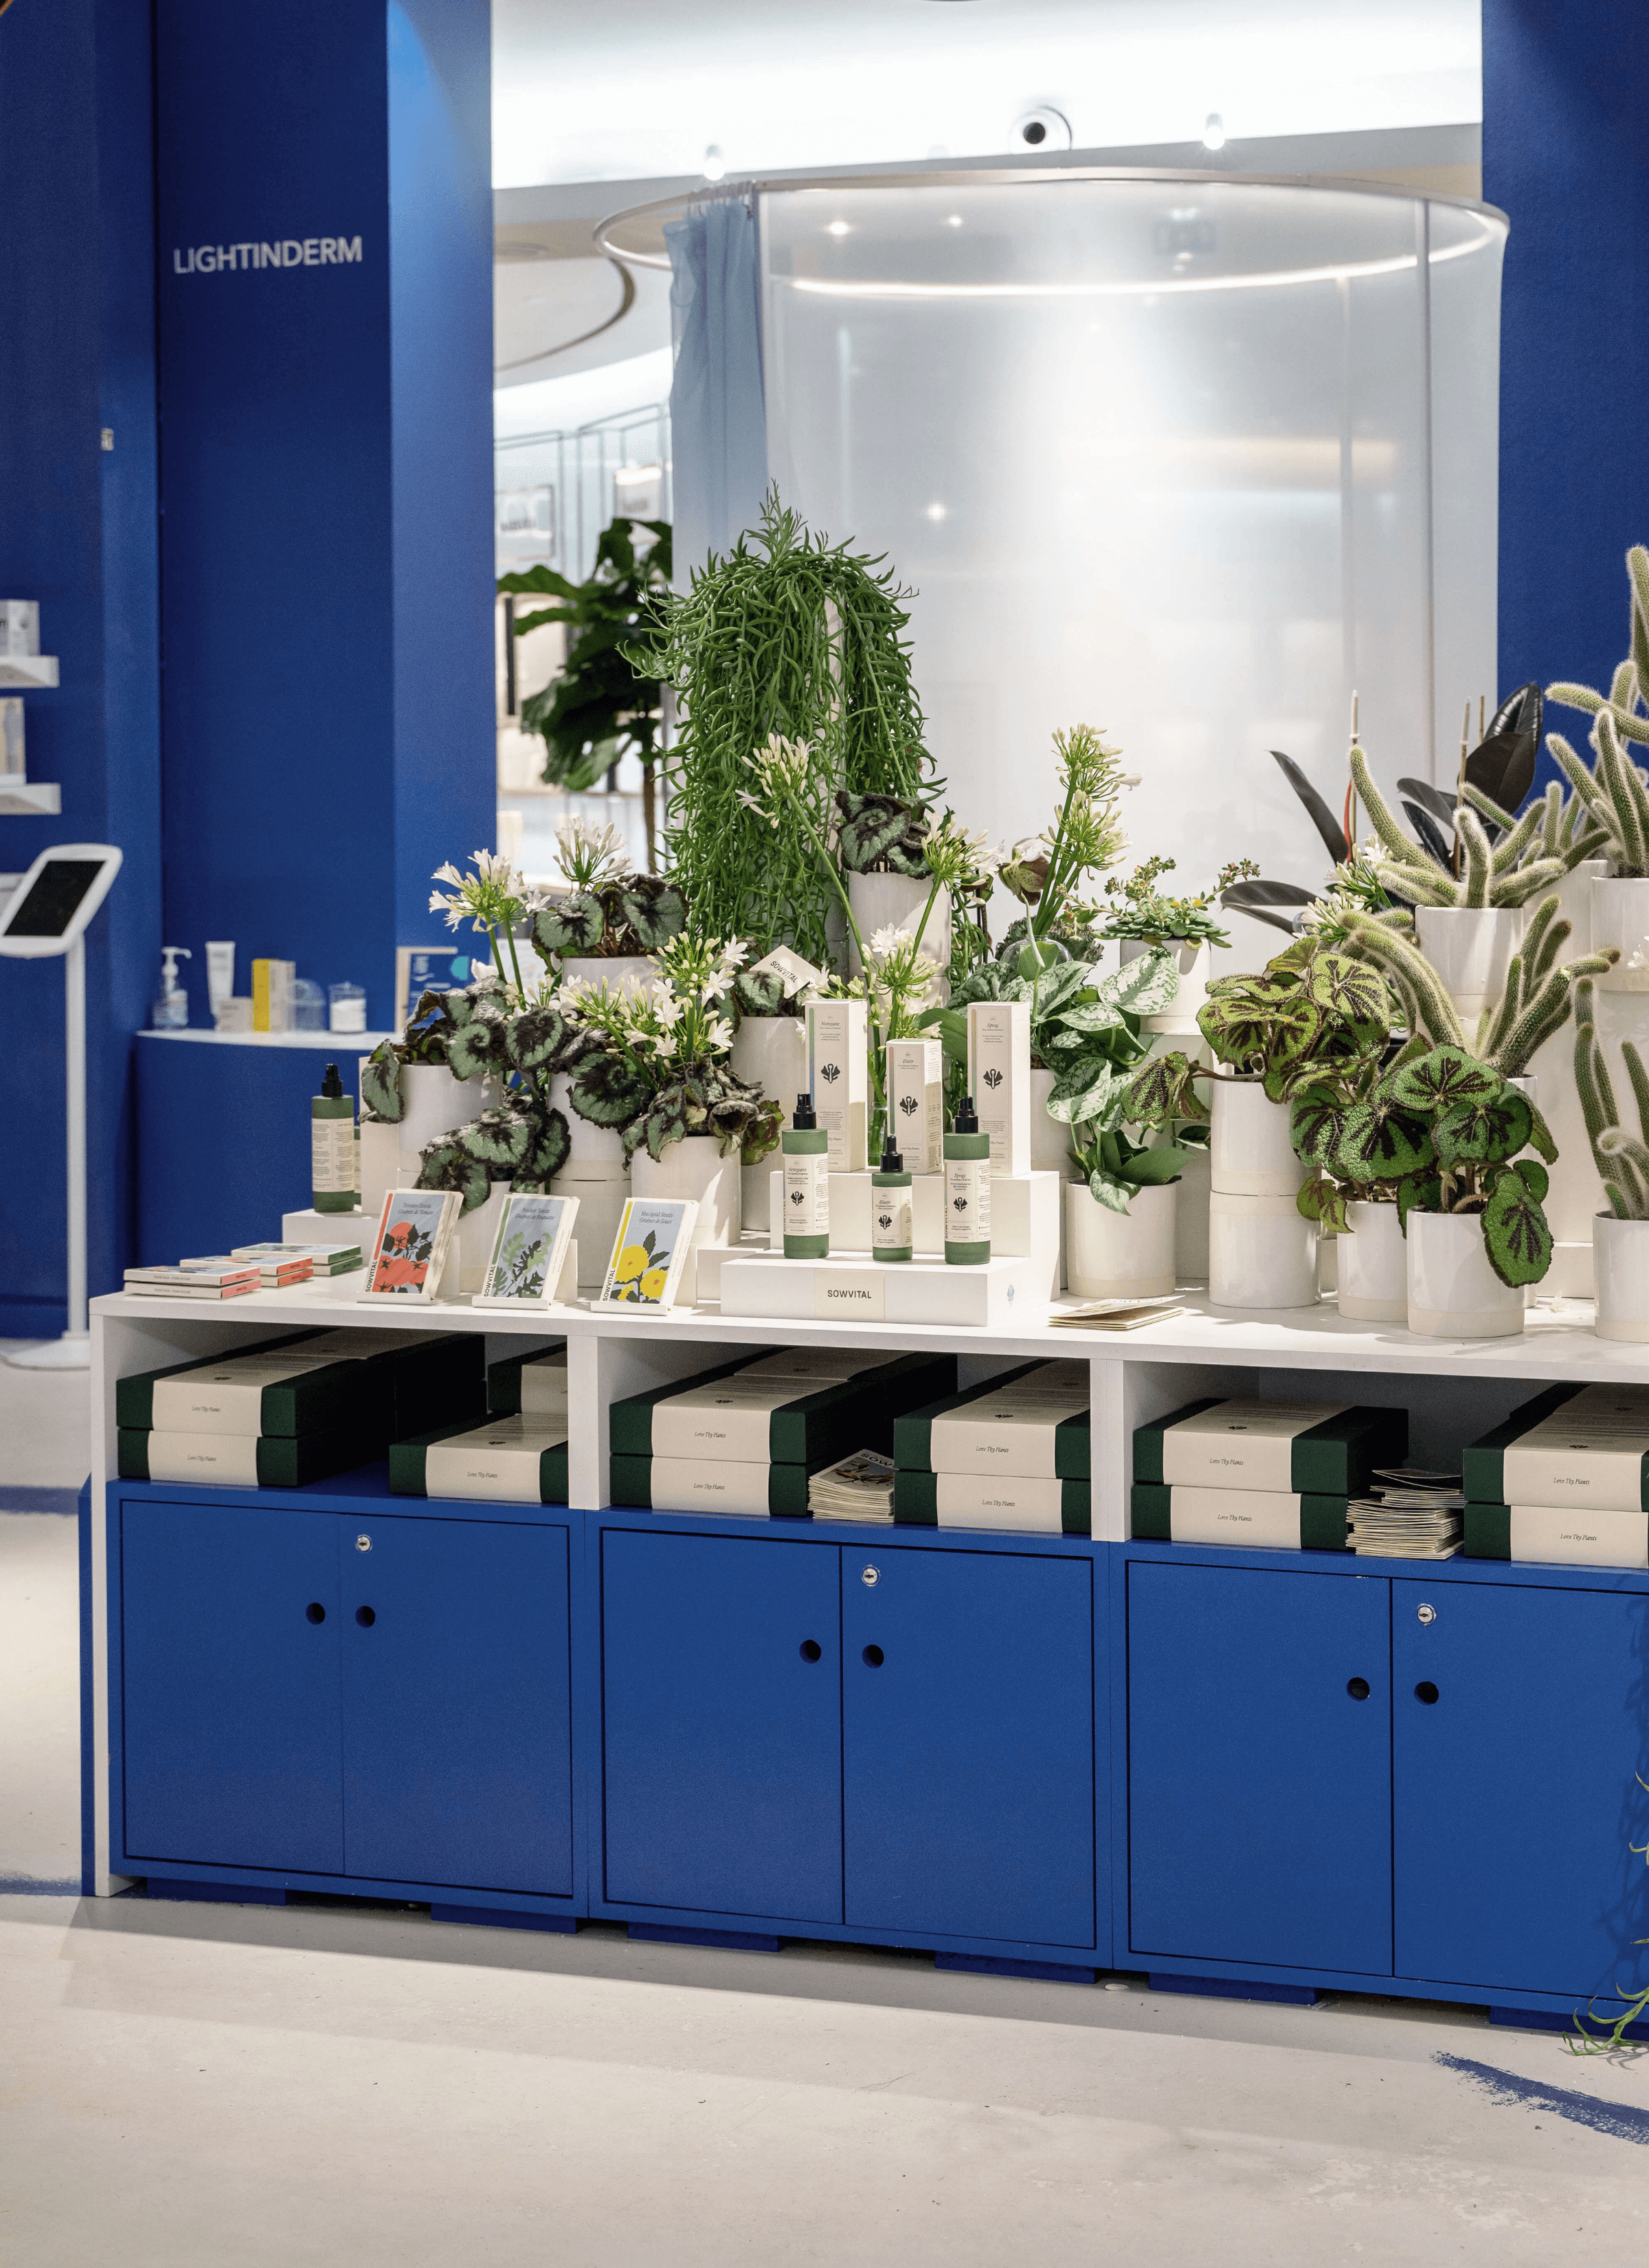 A display area in Le Bon Marché showcases Sowvital's products arranged neatly on the surface. Behind the products, a variety of potted plants, flowers, and cacti are used to create a lush and colorful backdrop. The bottom section features blue-painted cupboards, serving as a contrasting base for the display. Inside the cupboards, many three-step gift sets are neatly stocked, adding to the visual appeal and accessibility of the products. 